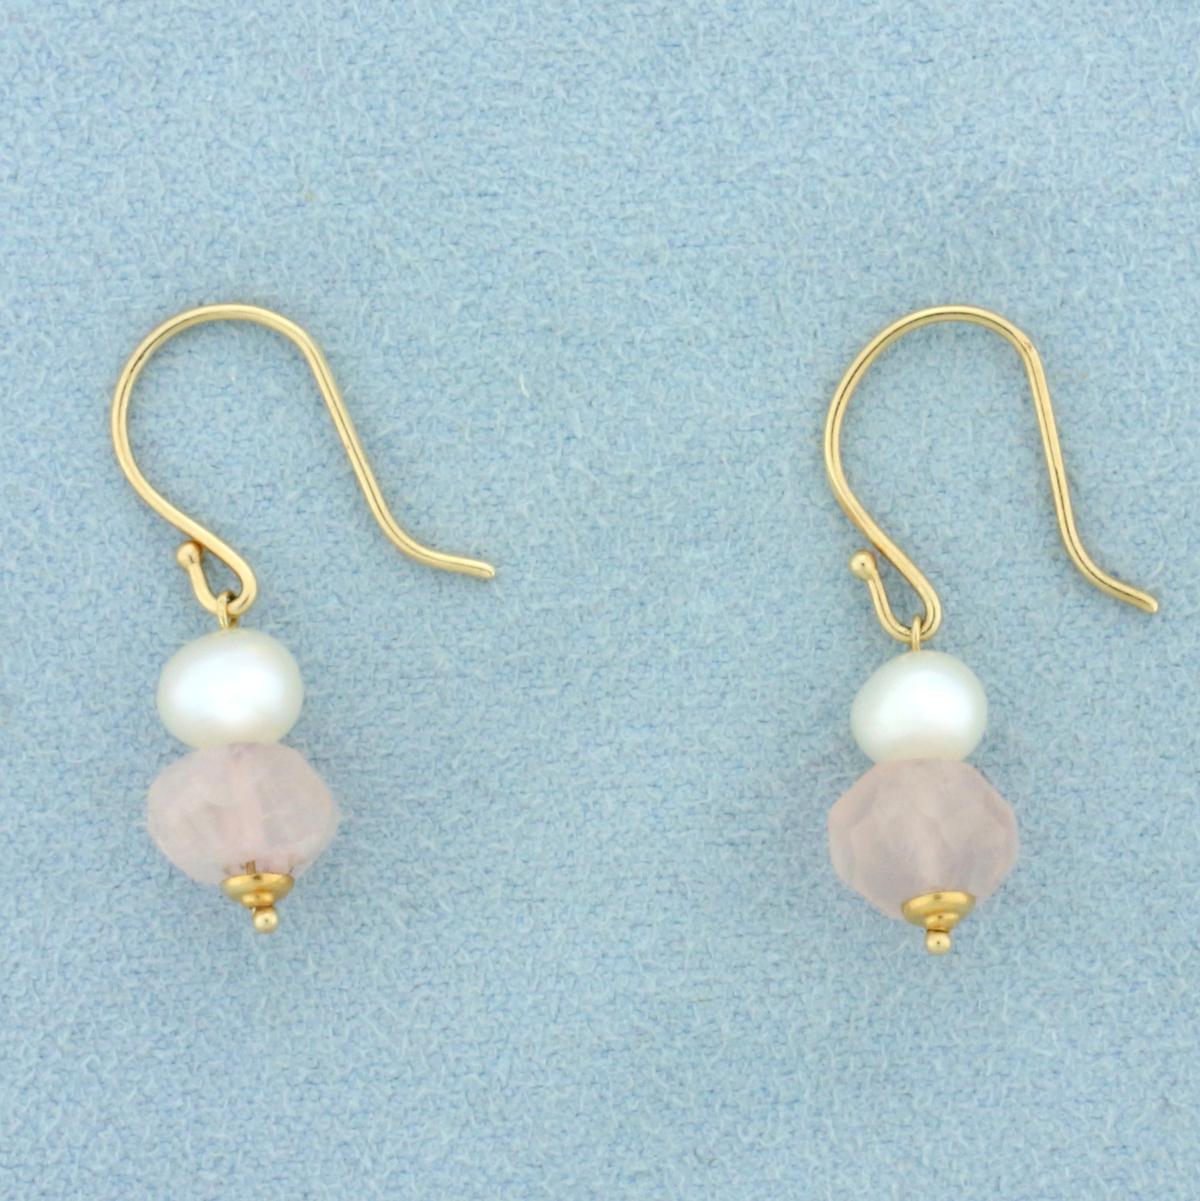 Pink Quartz And Pearl Dangle Earrings In 14k Yellow Gold